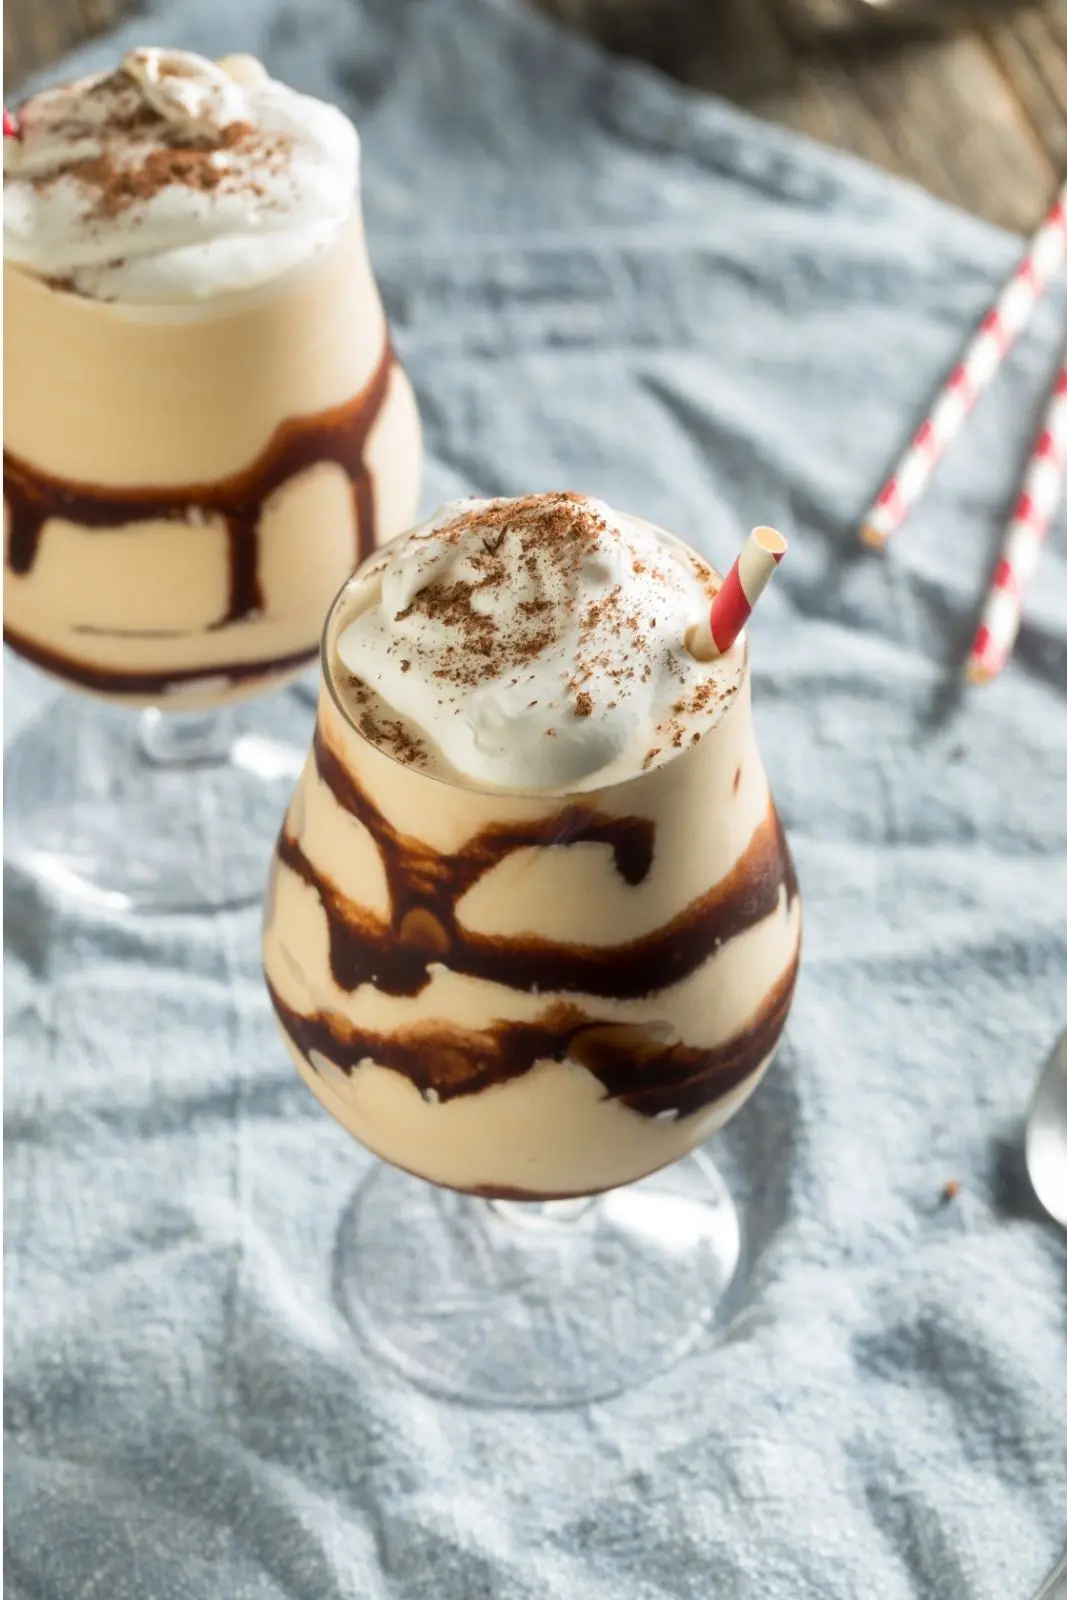 kahlua mudslide with chocolate drizzled inside the glass